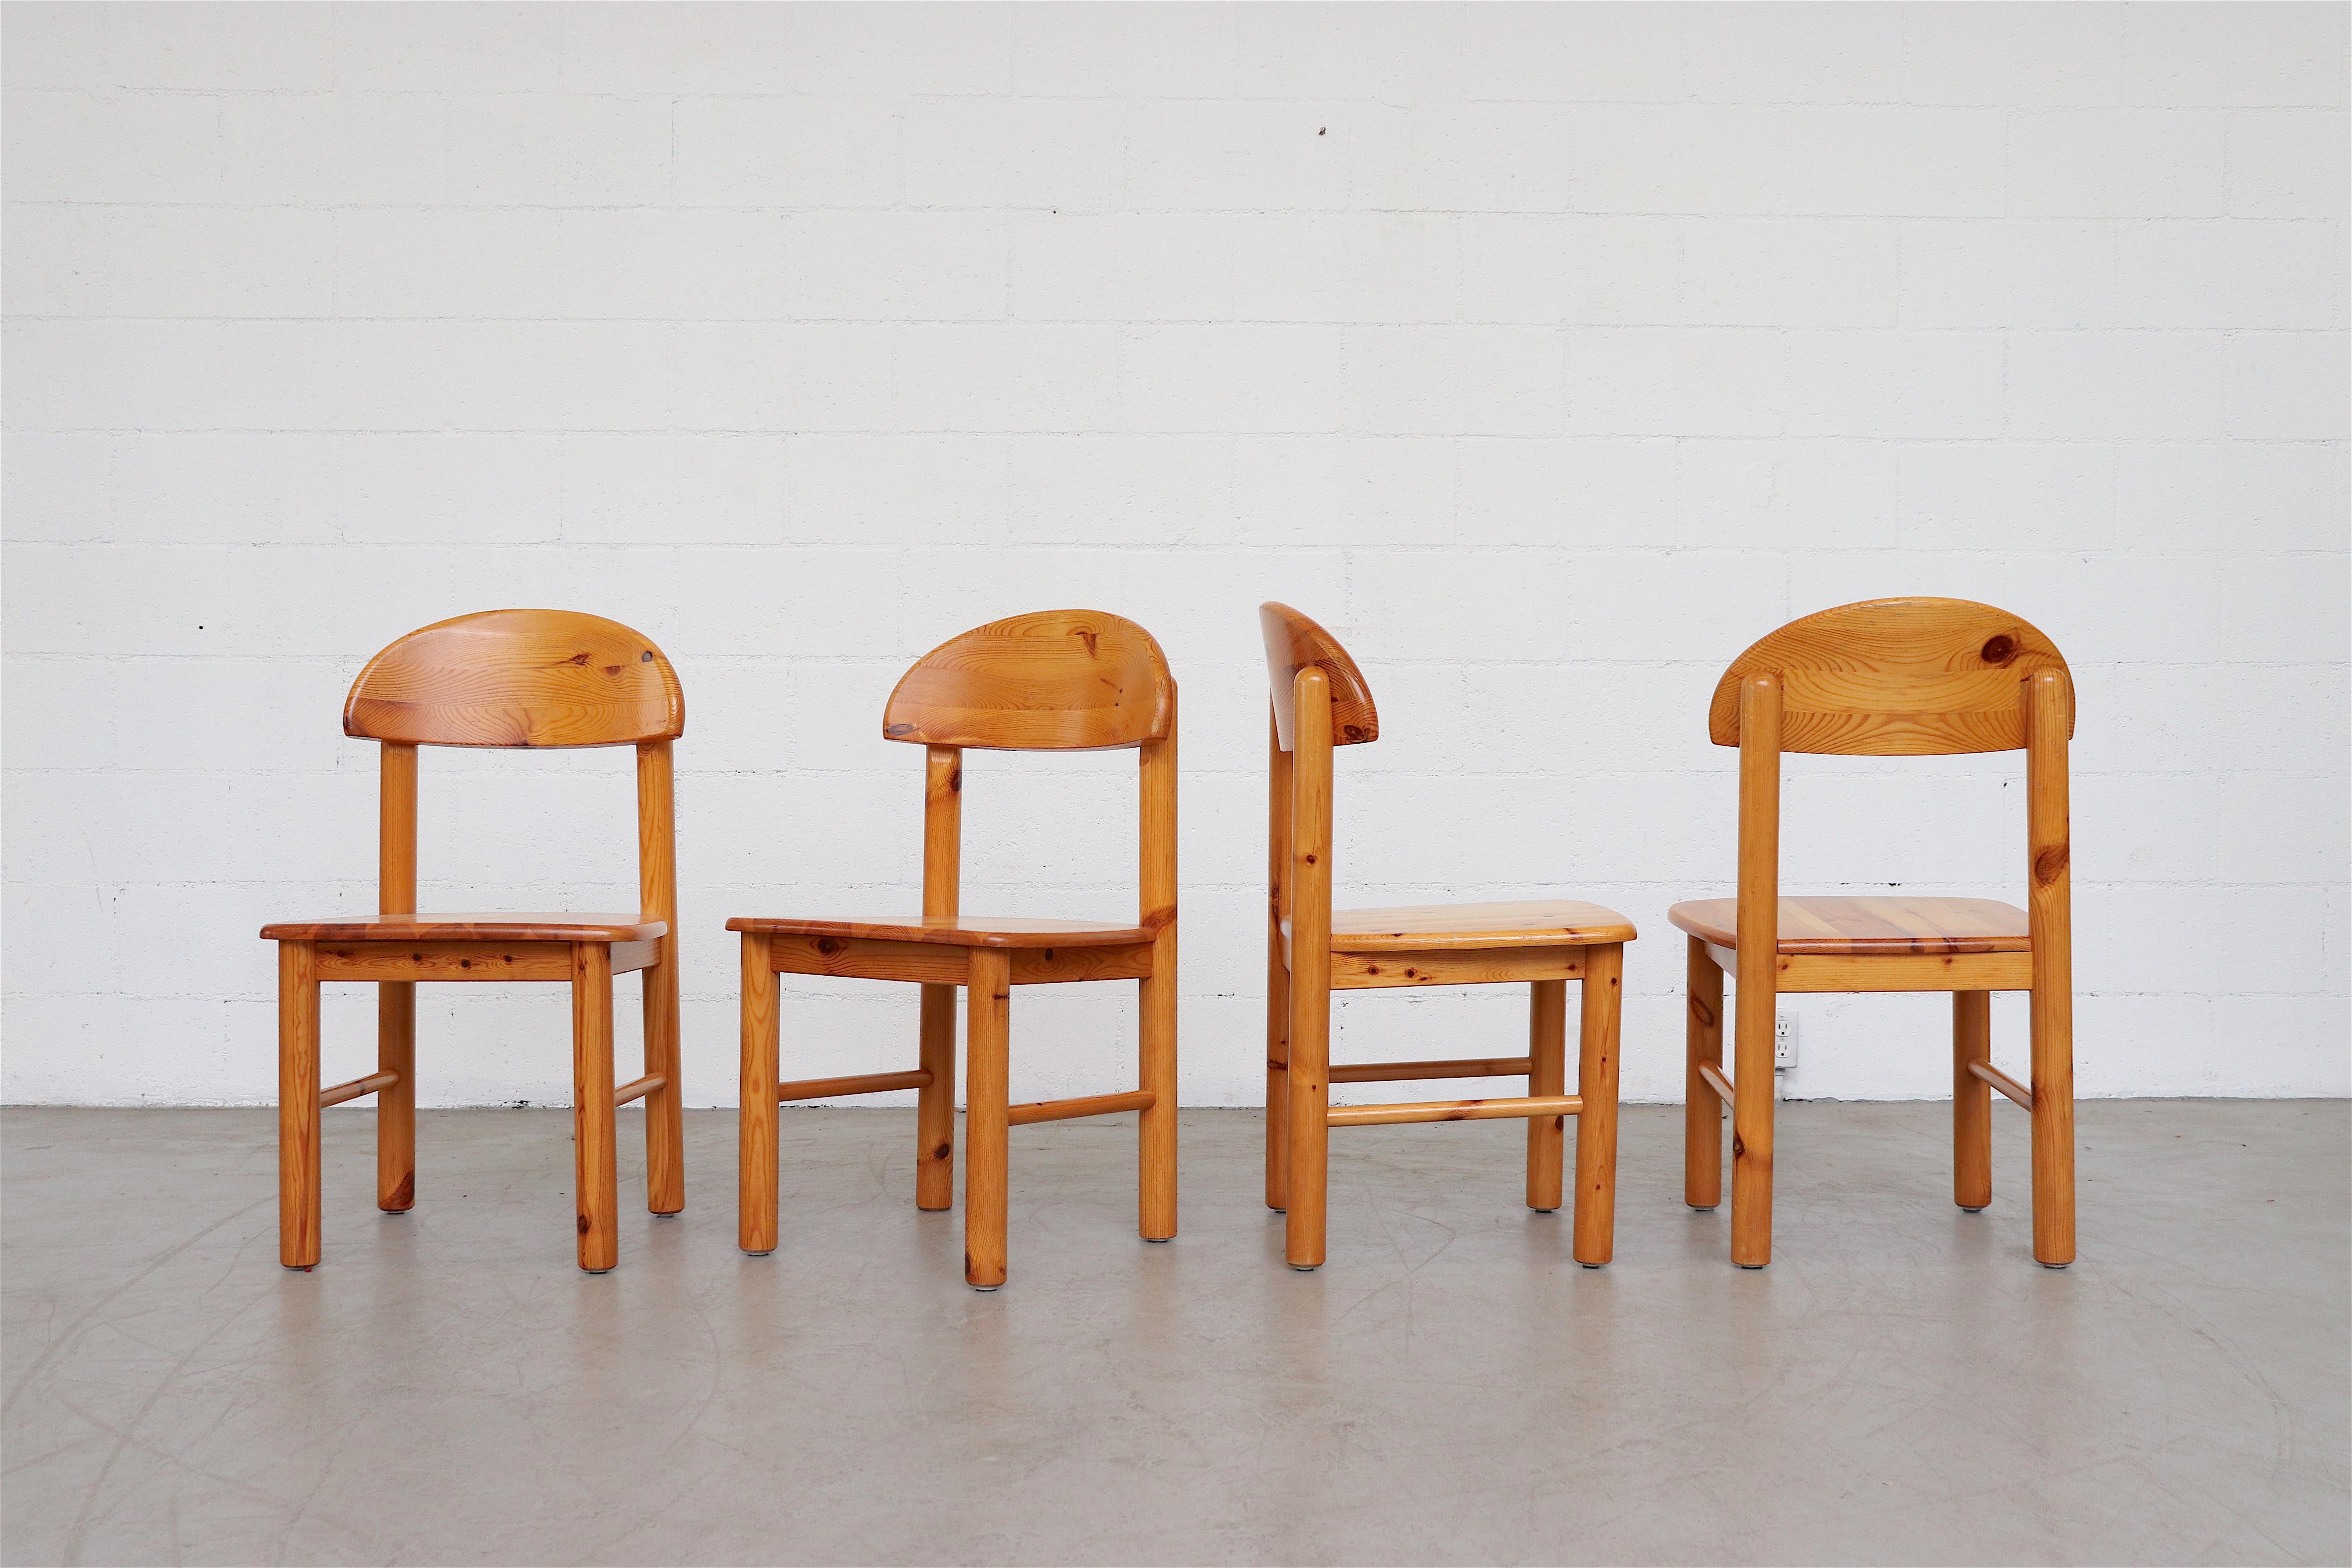 Set of 6 Rainer Daumiller style pine dining chairs. Four armless chairs and two with armrests. In original condition with signs of wear consistent with their age and use.
Side chairs measure: 19.5 x 18 x 18.25/34.25.